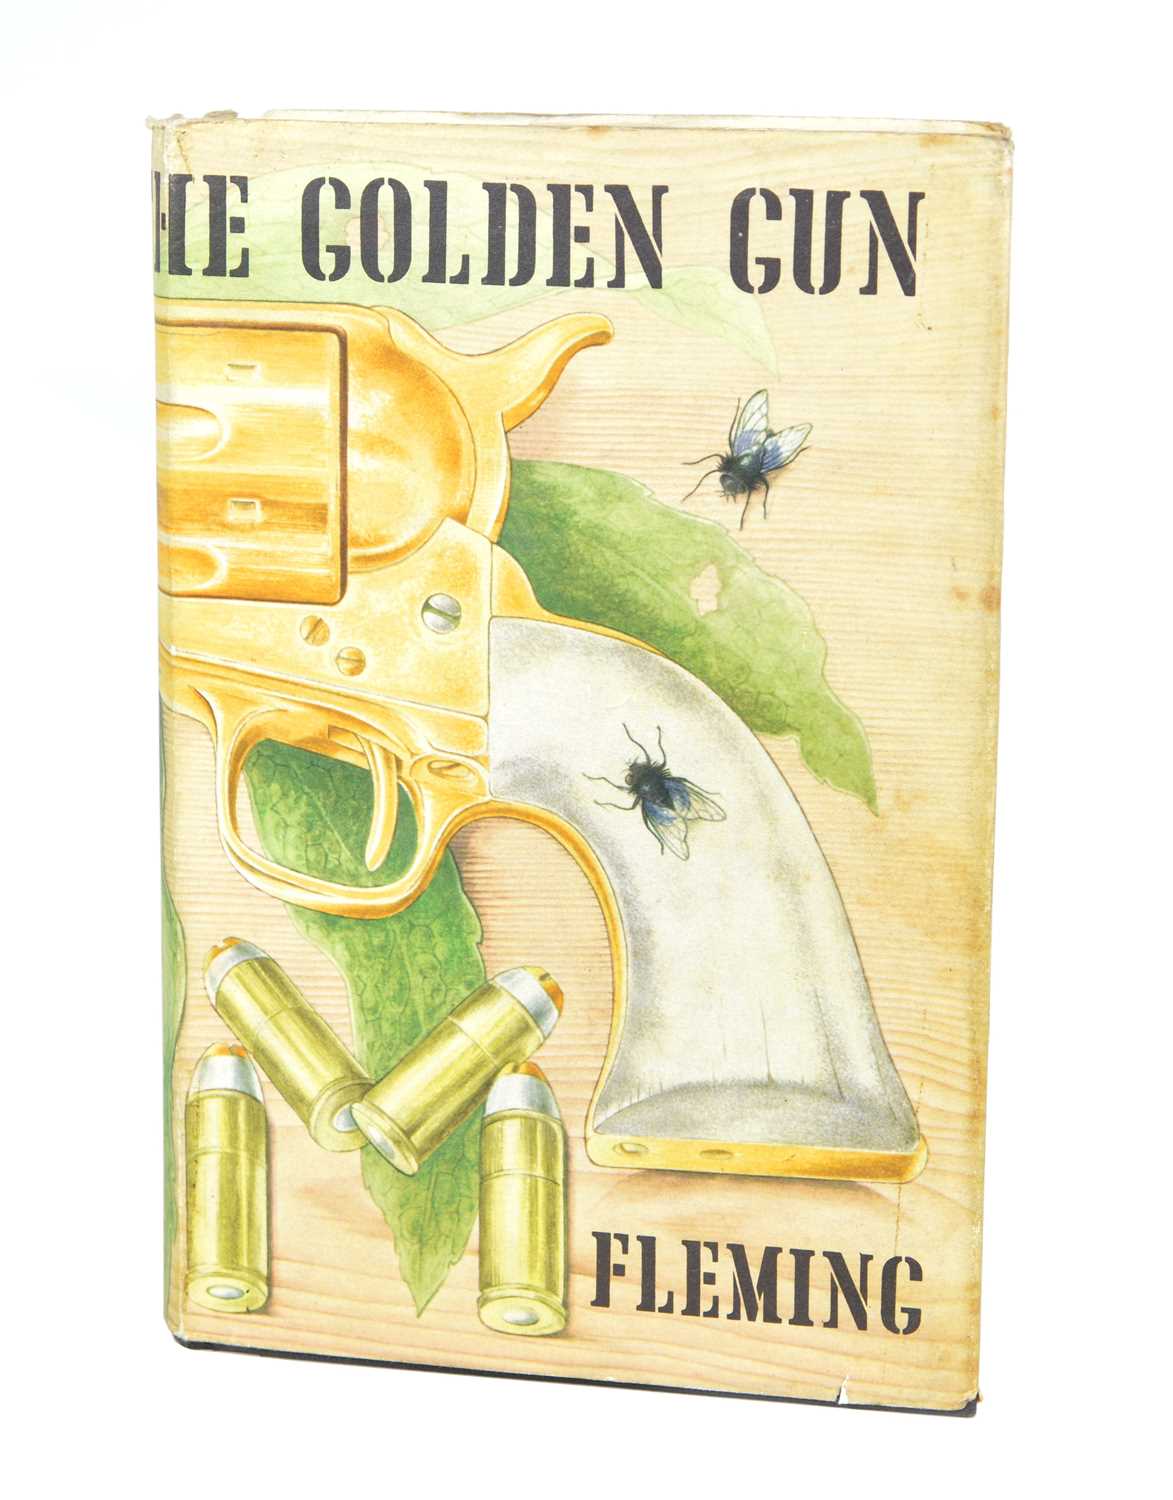 Lot 66 - The Man with the Golden Gun by Ian Fleming, First Edition.